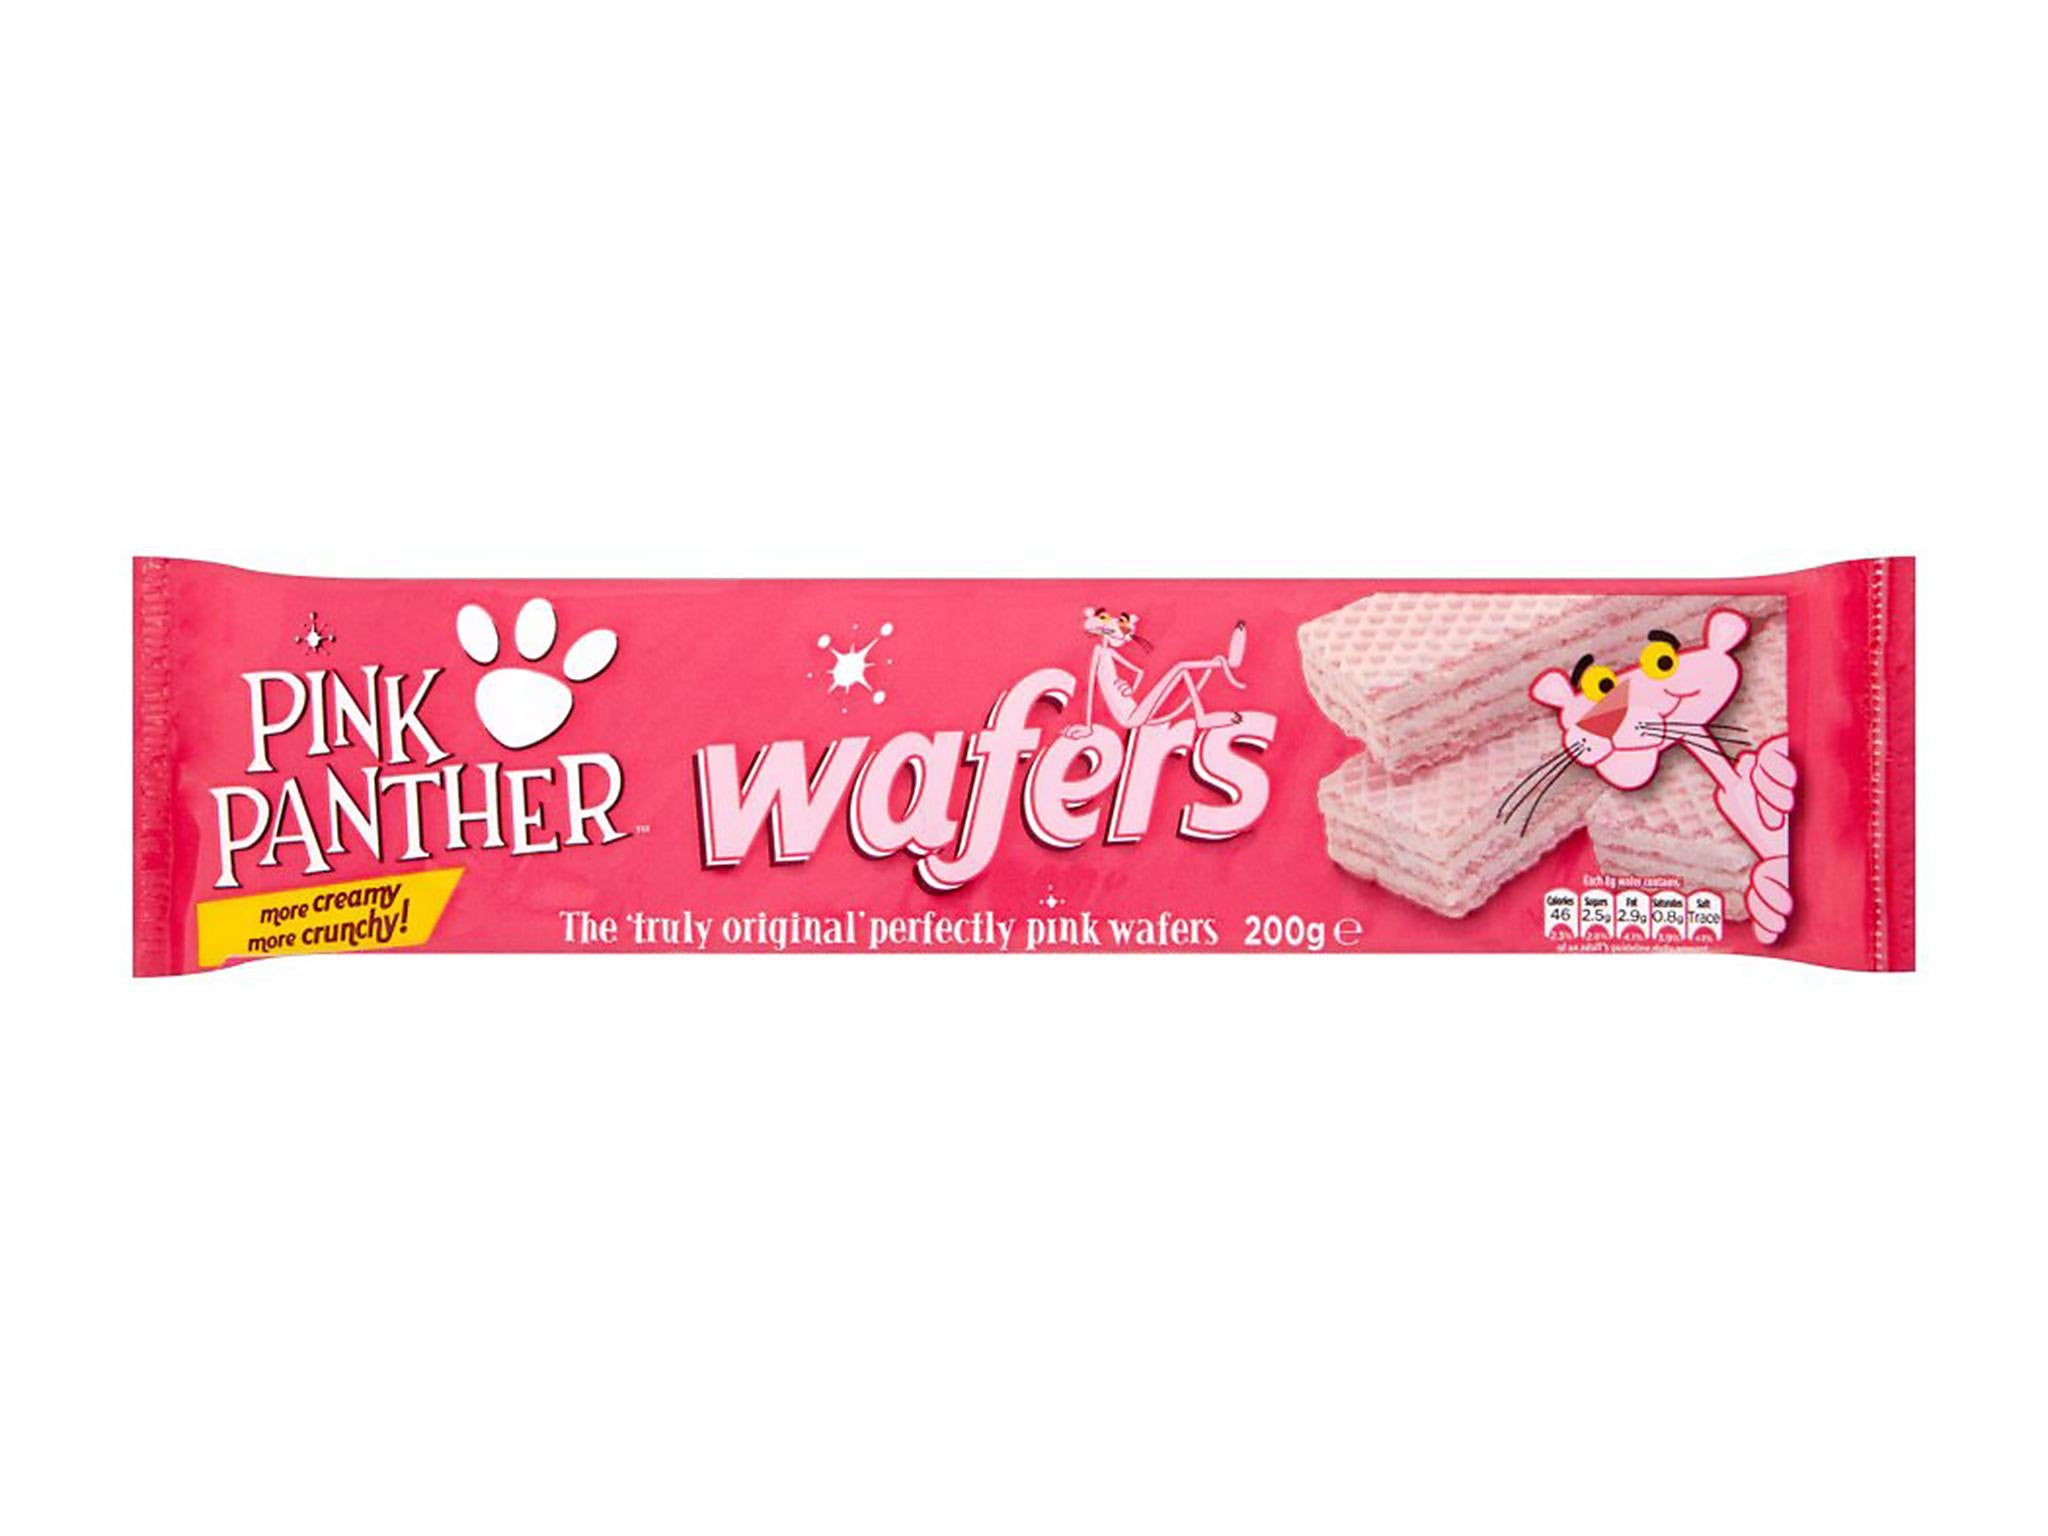 Rivington Biscuits makes the popular Pink Panther pink wafers